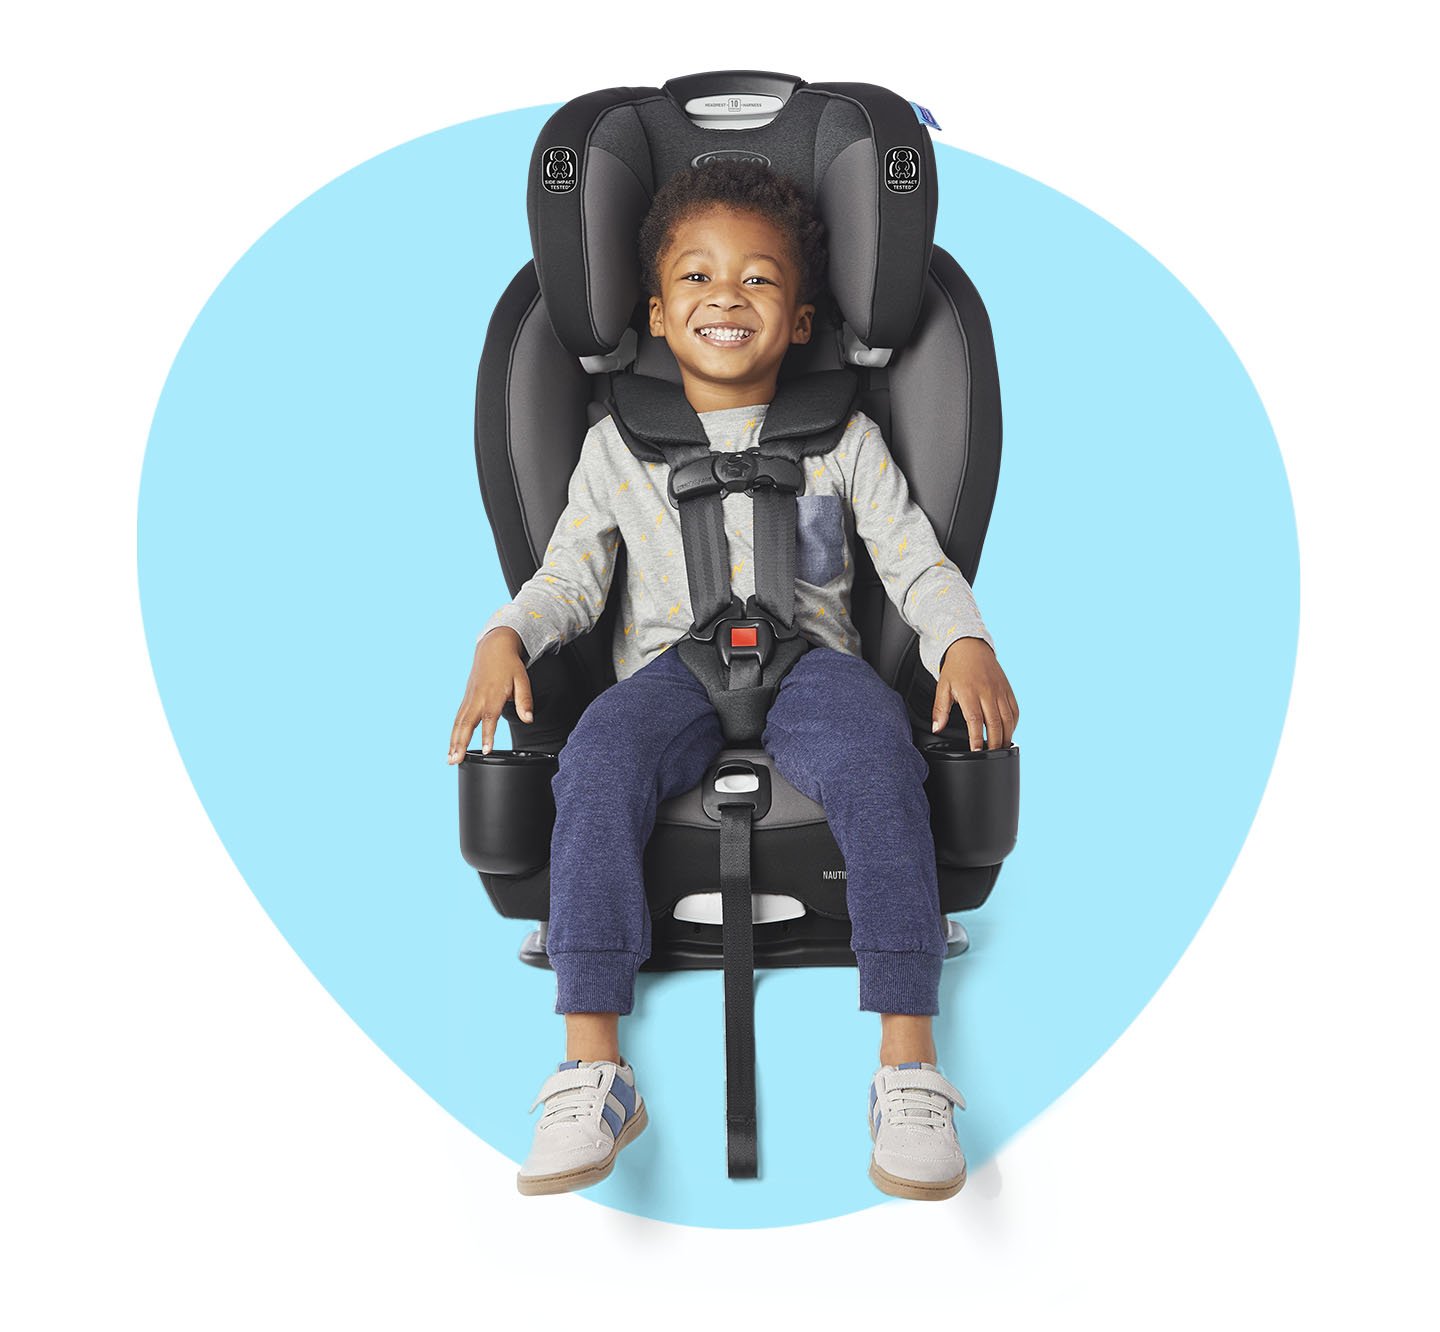 Graco S Car Seat Safety Standards